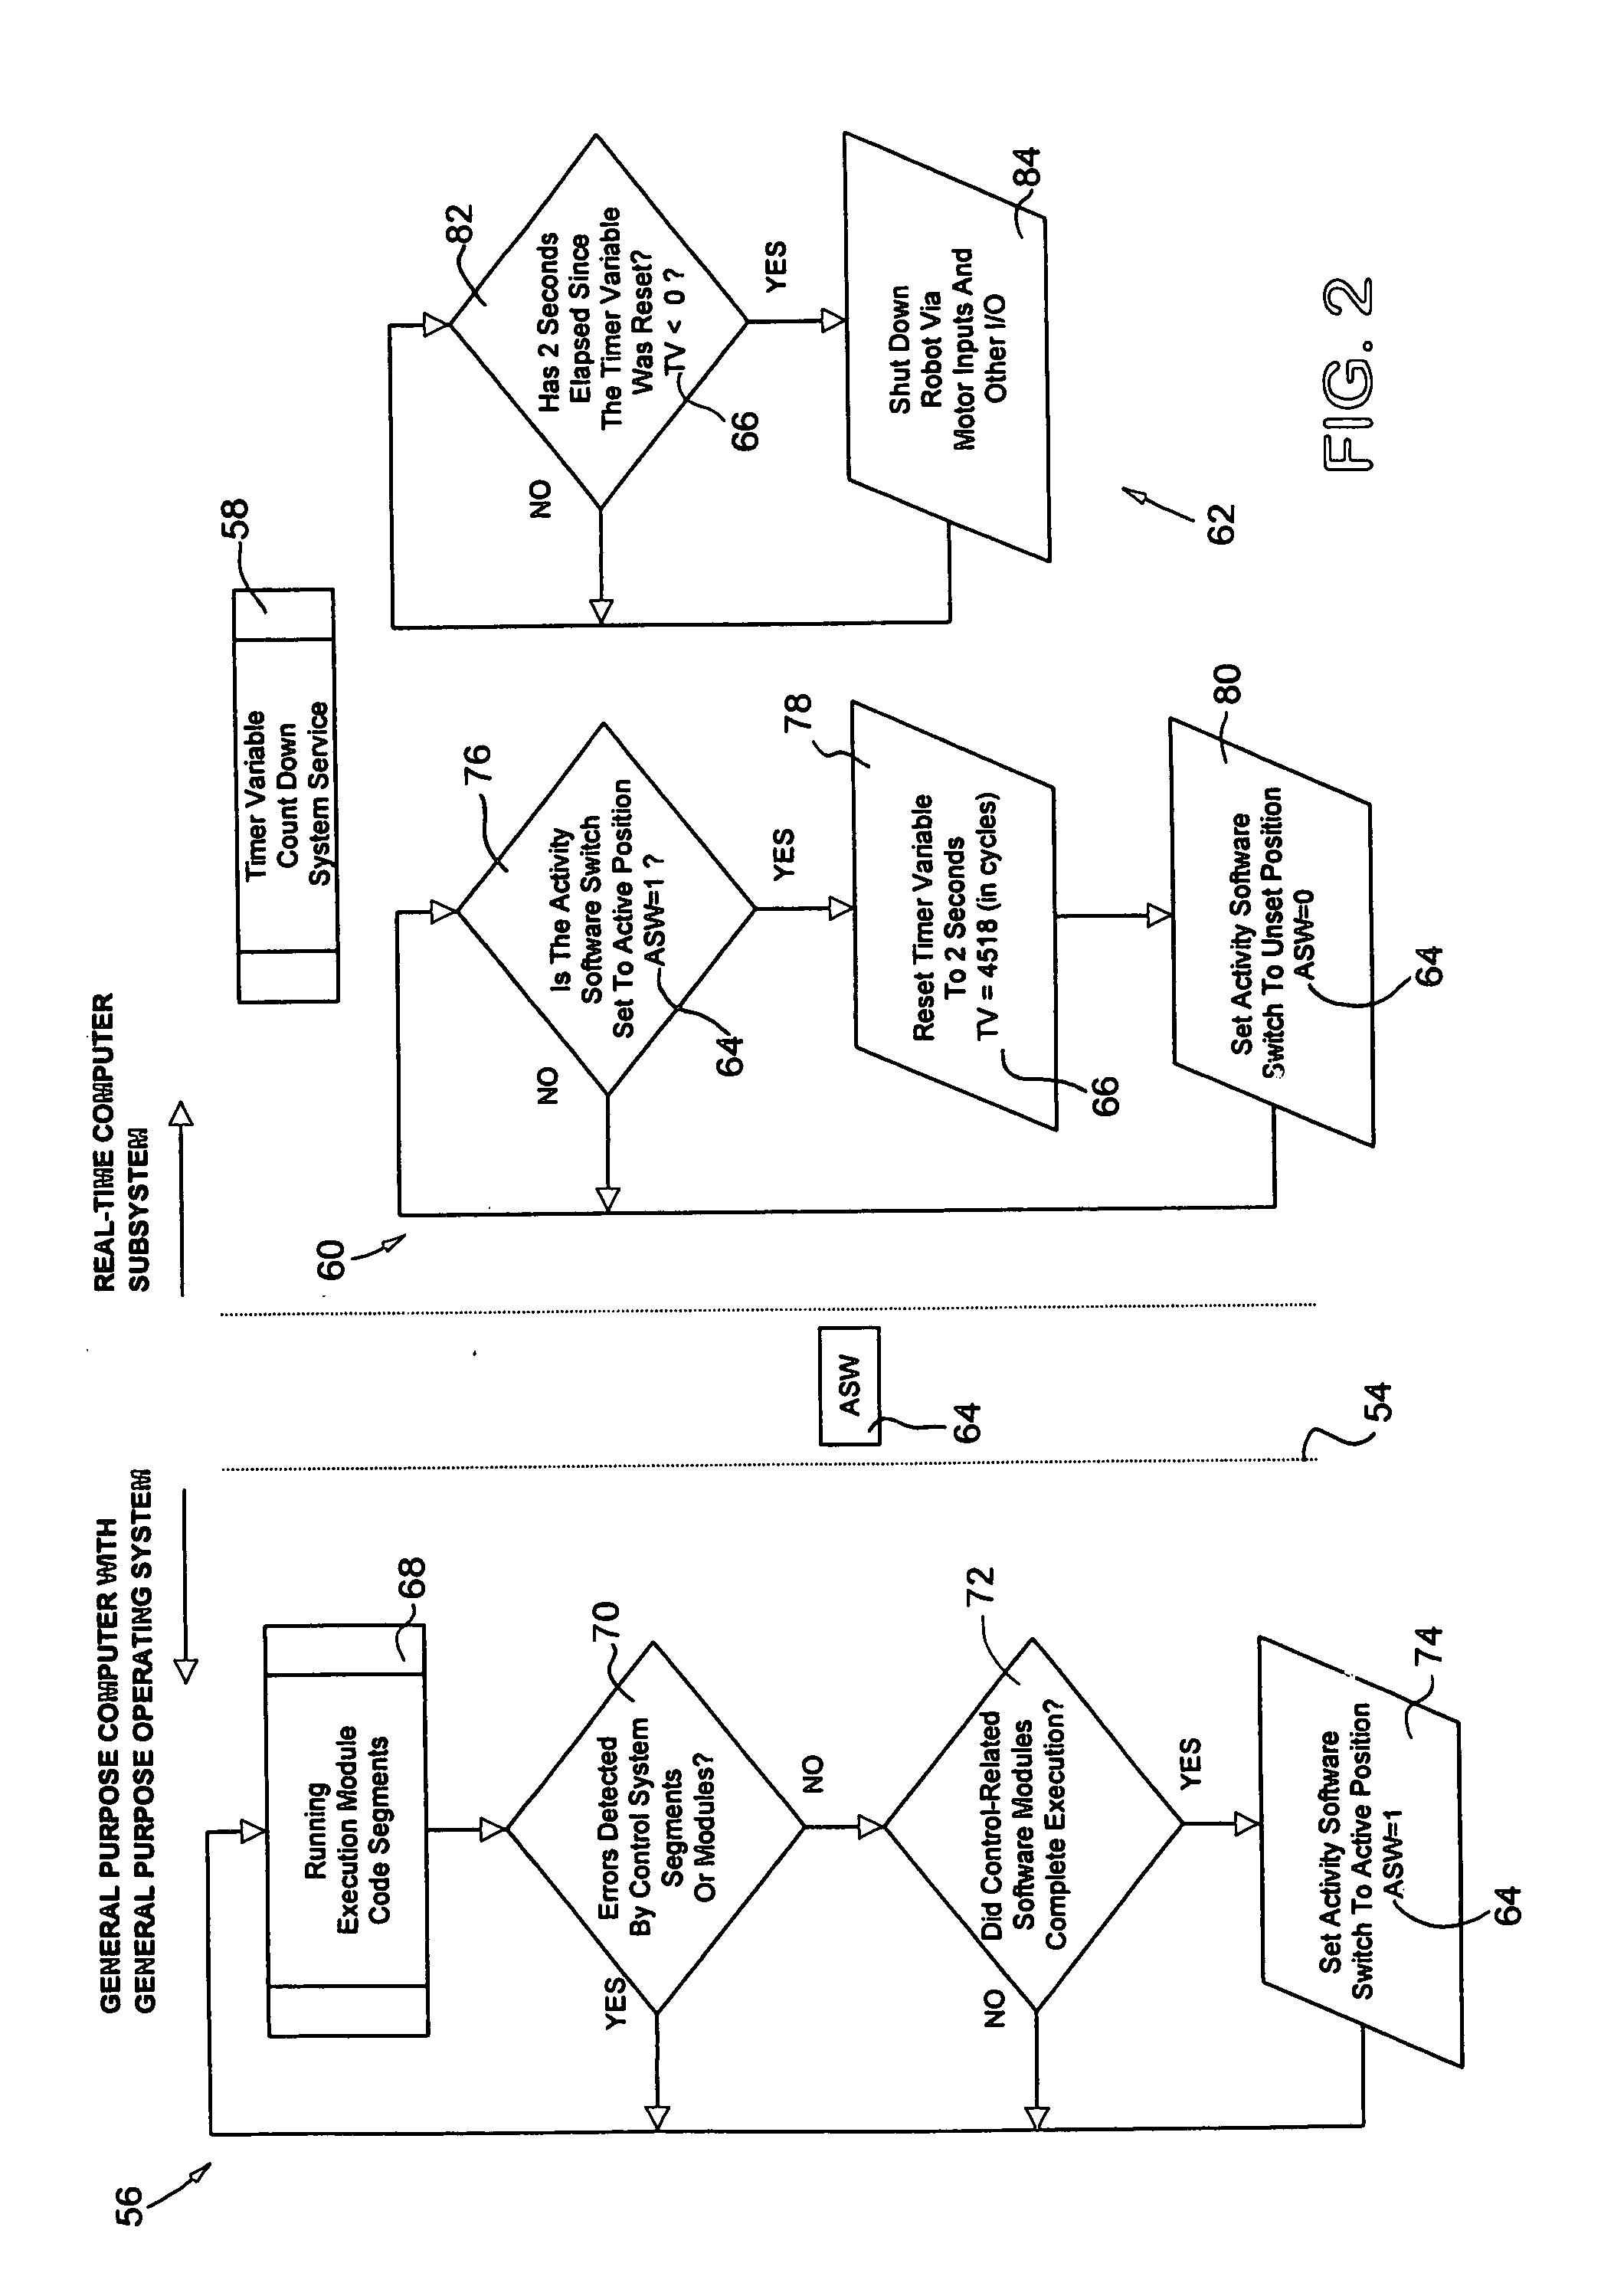 Automation equipment control system